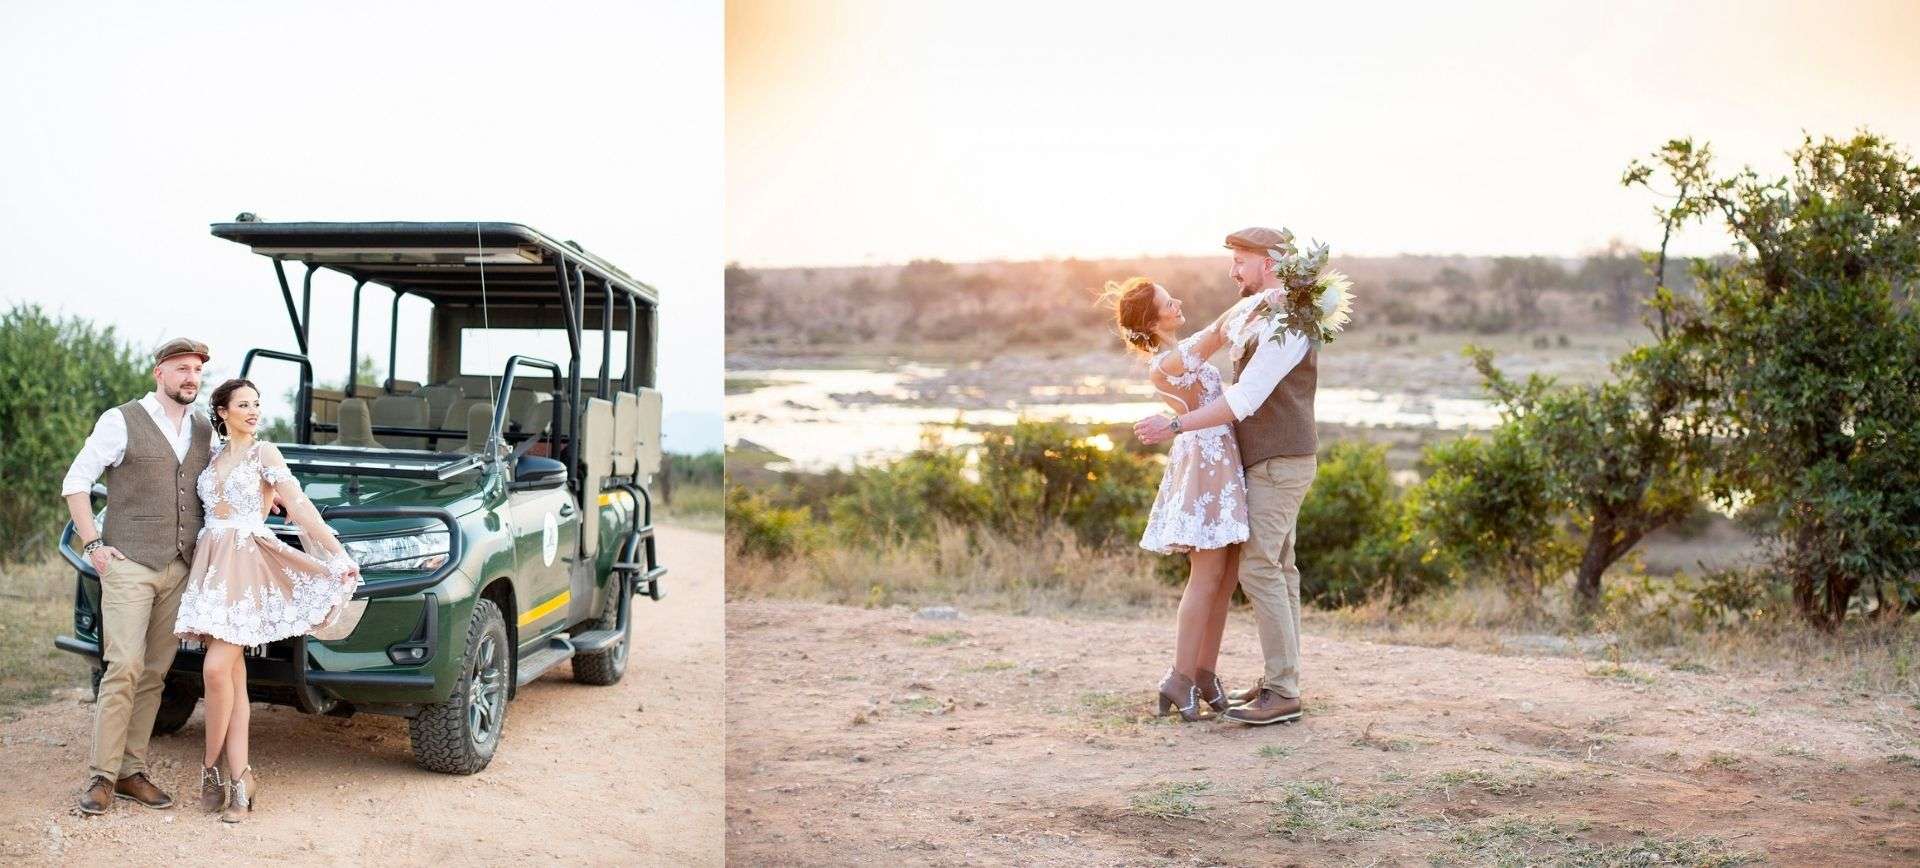 safari elopement in south africa -wedding couple with jeep on safari